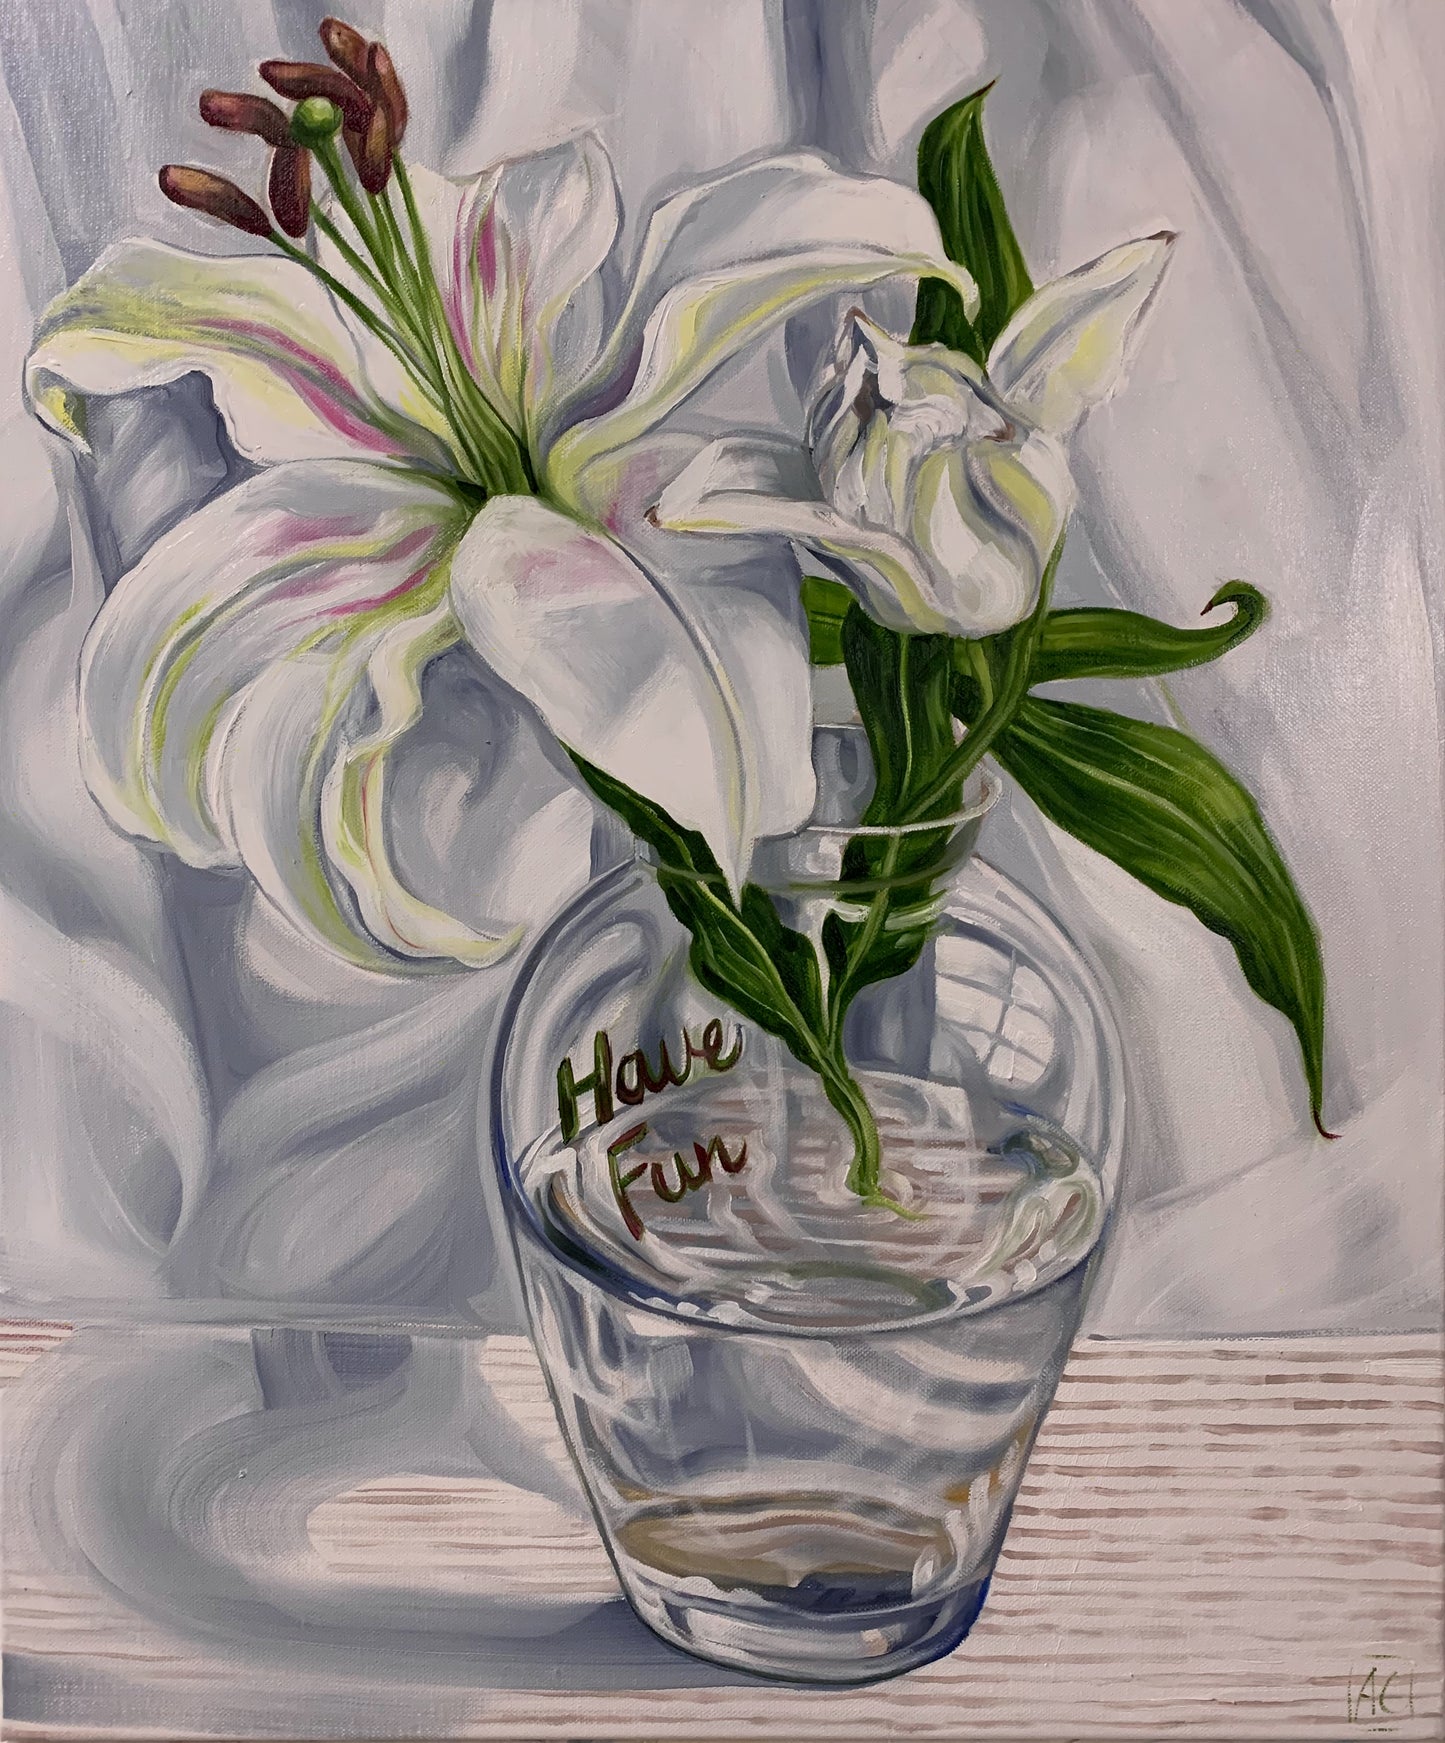 Flowers and Words of the Day - White Lillium